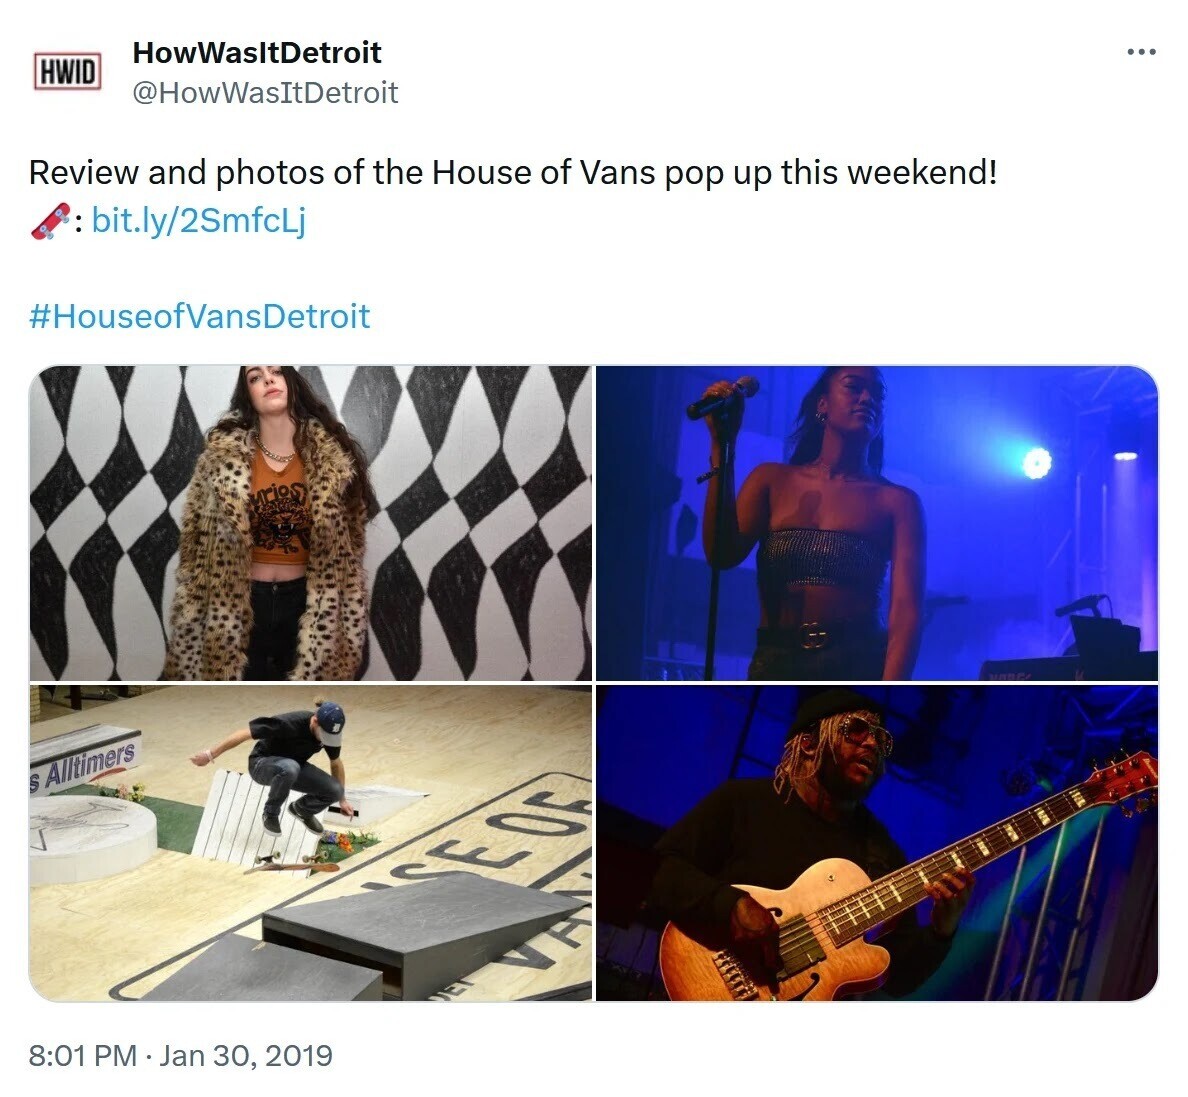 House of Vans’ pop-up event experience shared on X